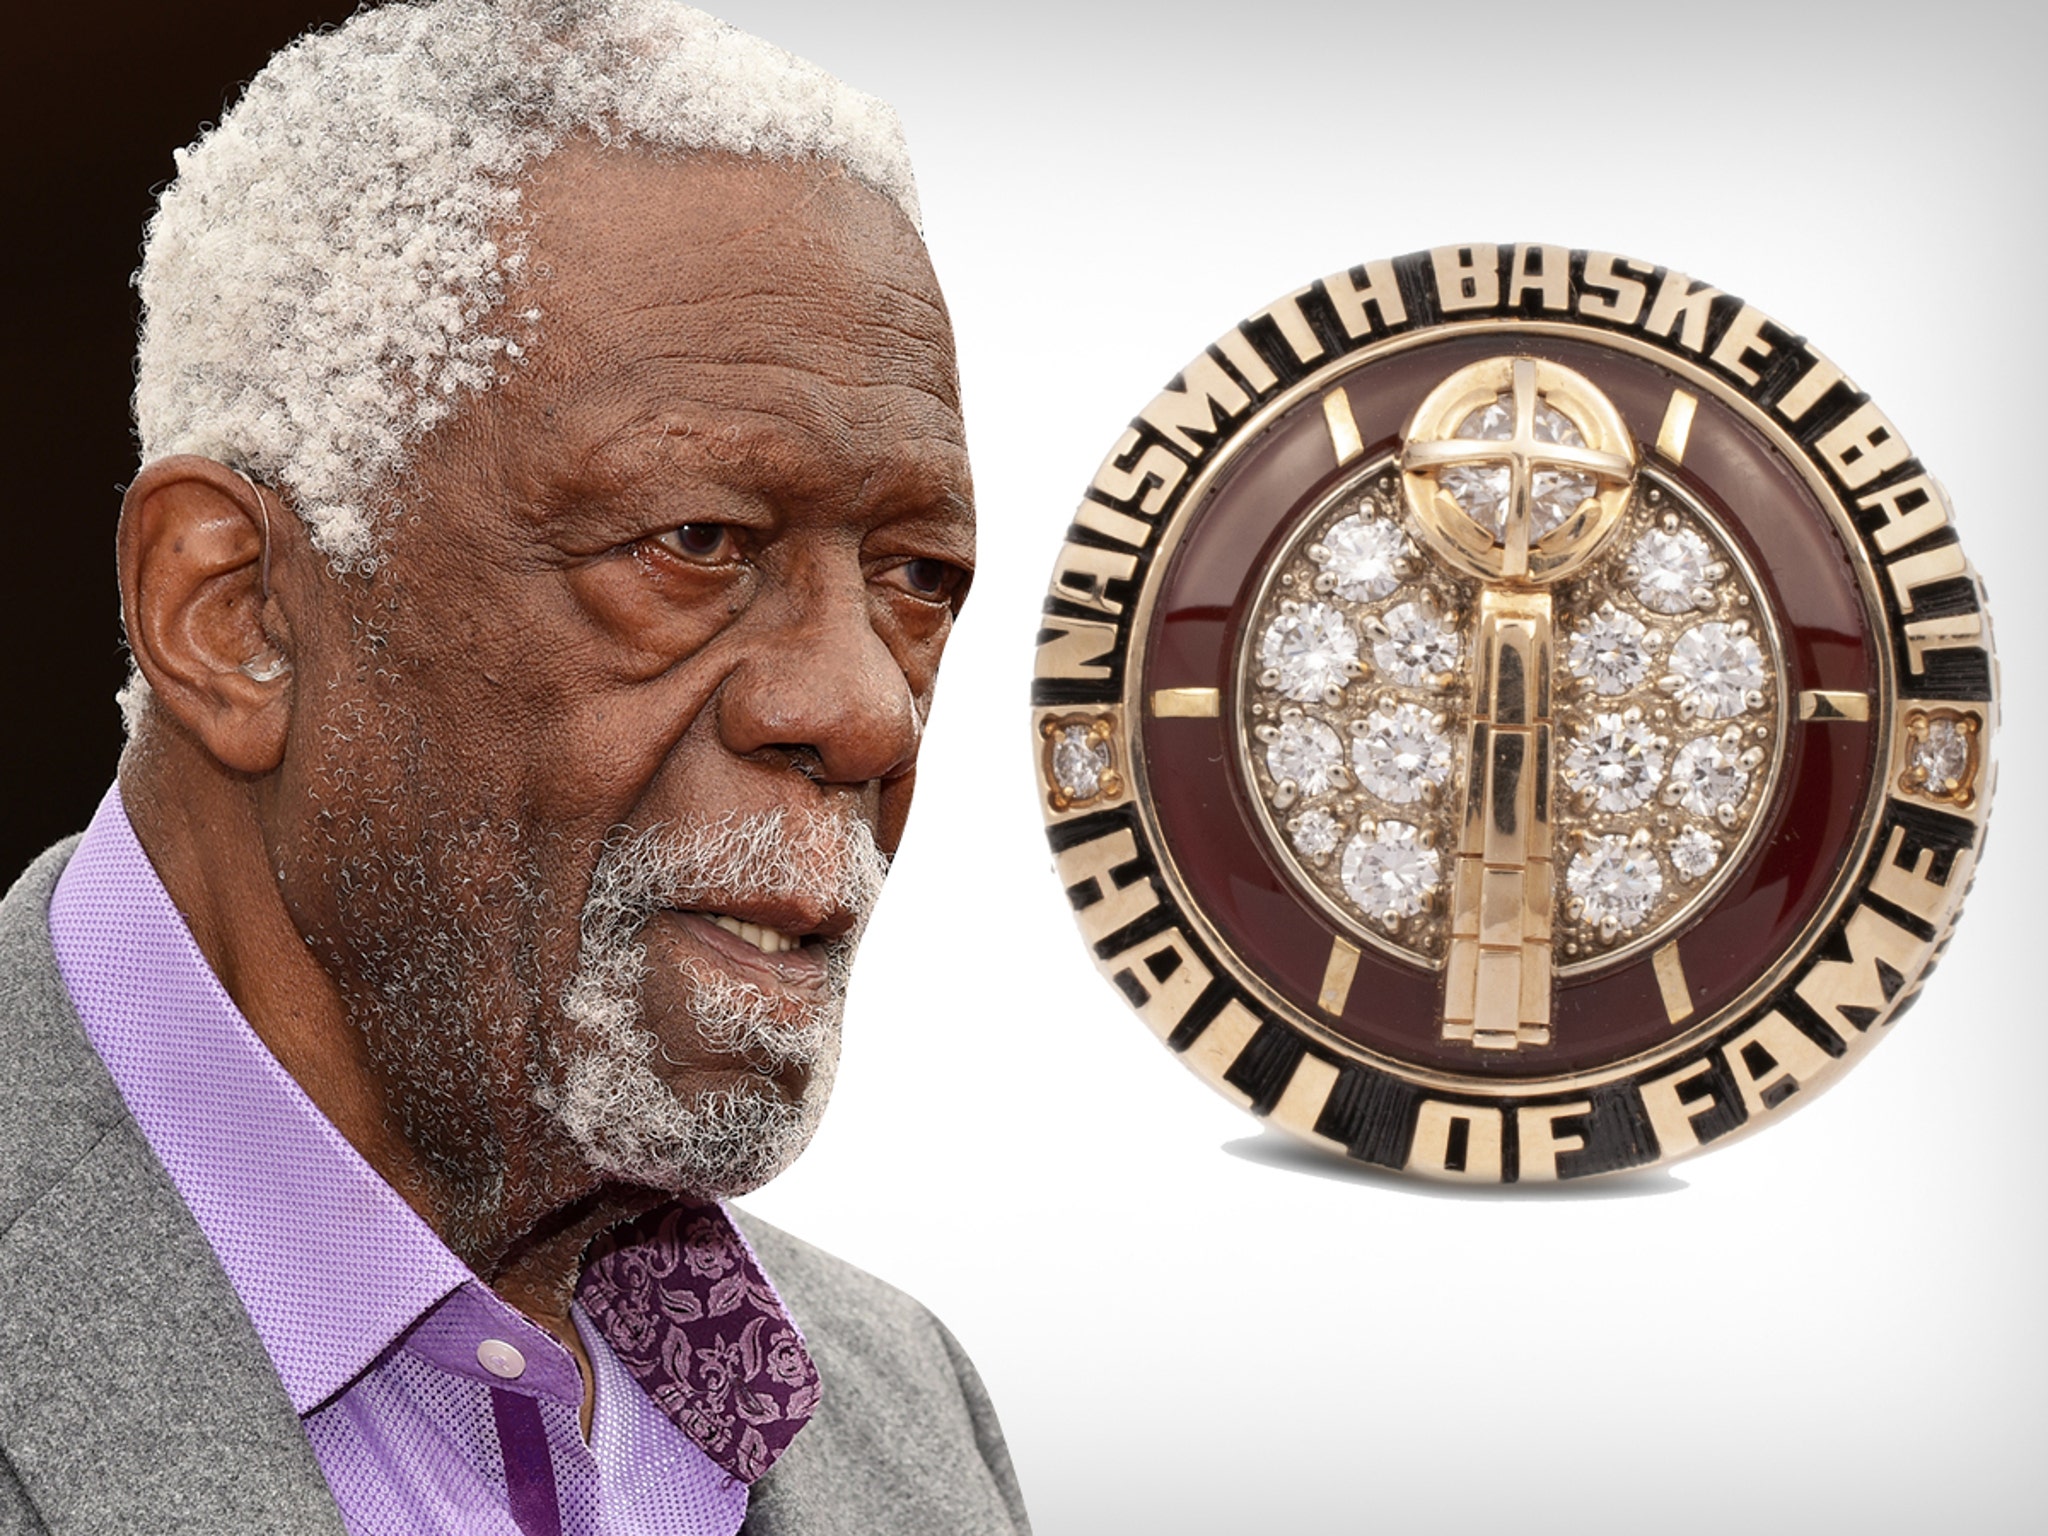 William Bill Russell - Indiana Basketball Hall of Fame